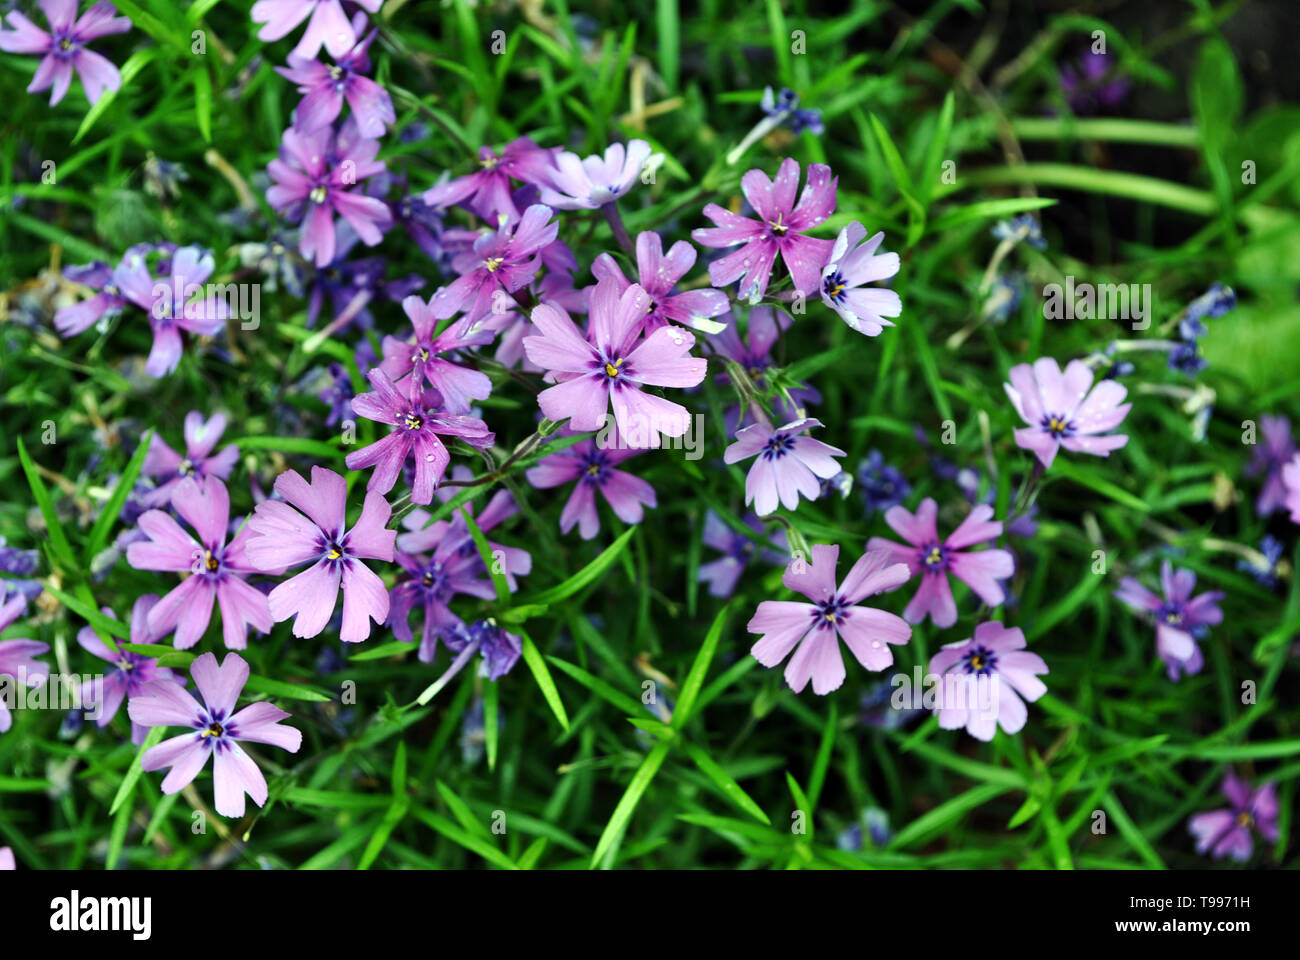 Dianthus deltoides (maiden pink) flowers and green leaves background, close up detail Stock Photo